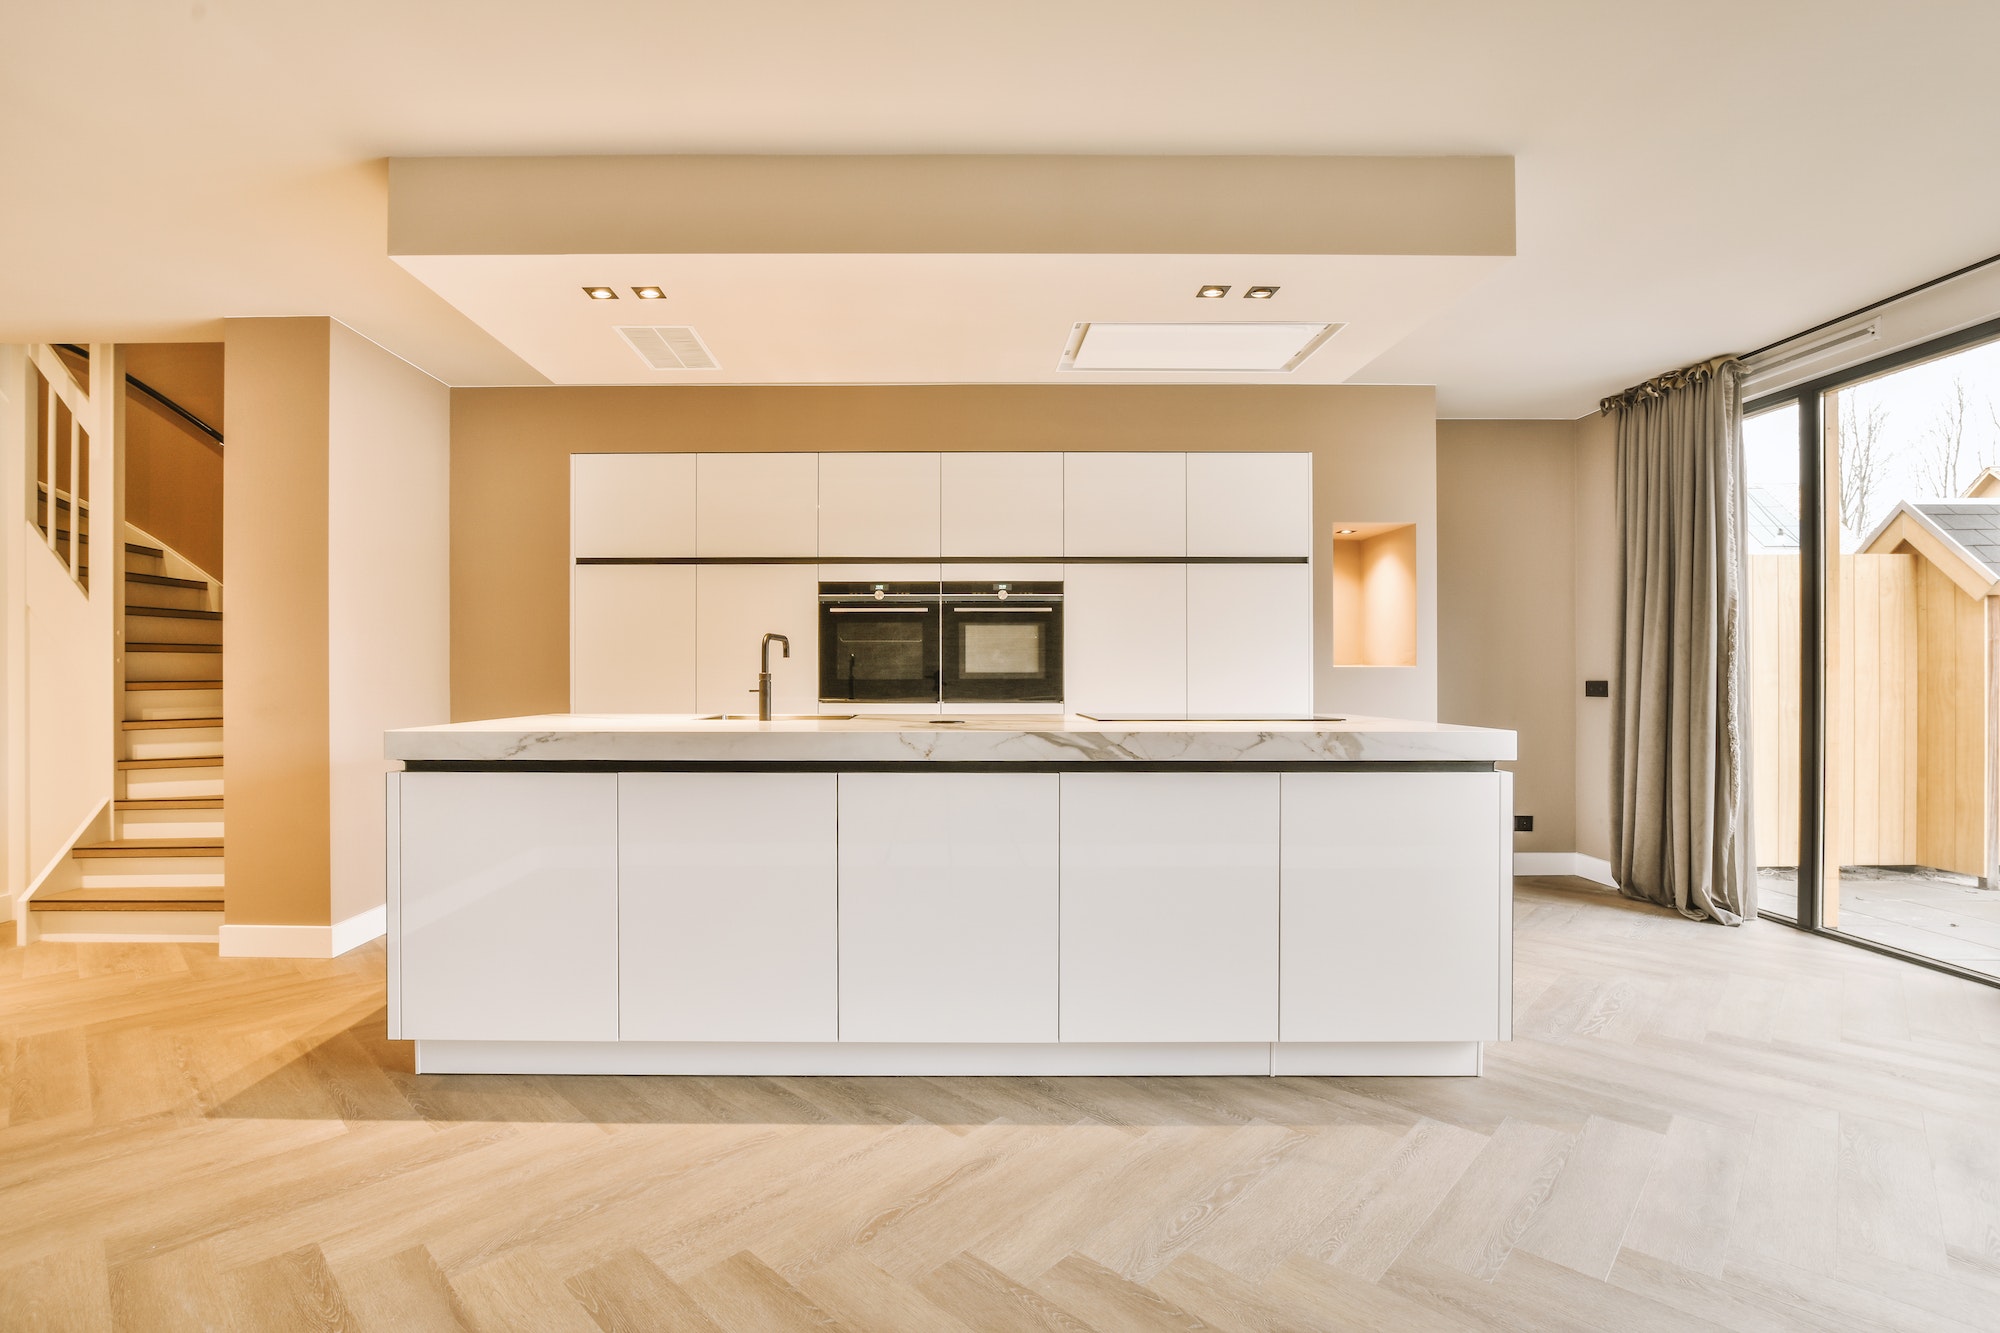 A minimalist kitchen with a block system in white design